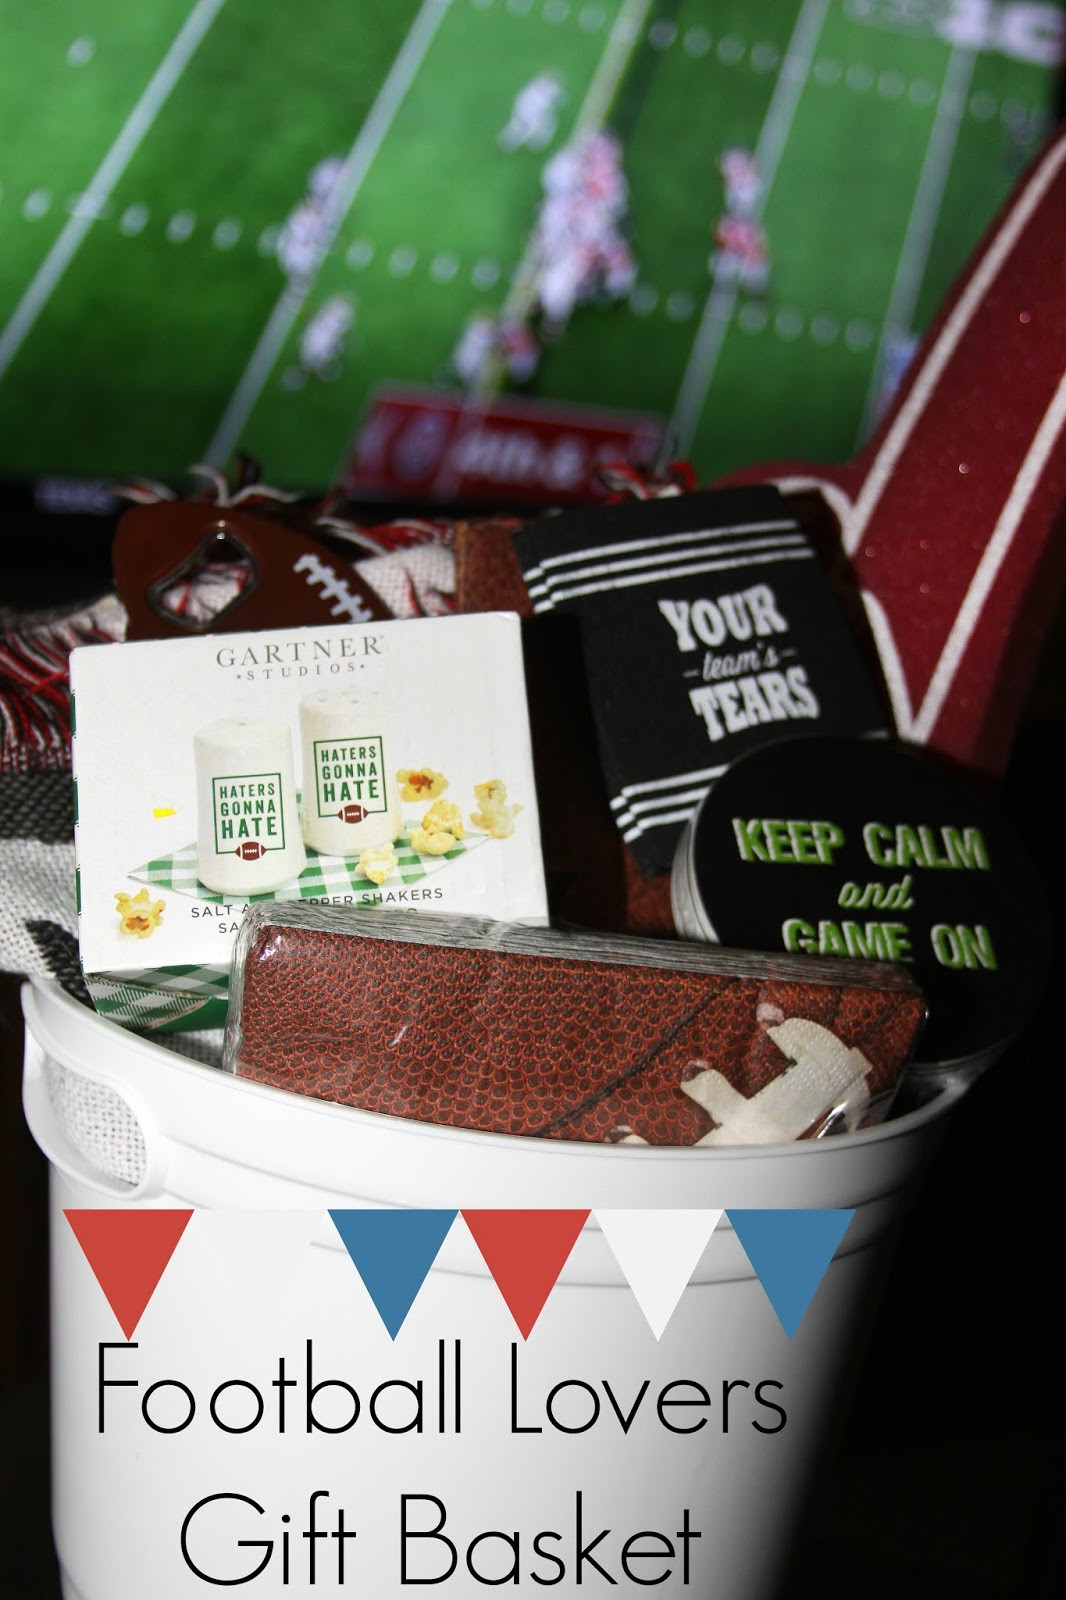 Soccer Gift Basket Ideas
 For the Love of Food DIY Football Lovers Gift Basket